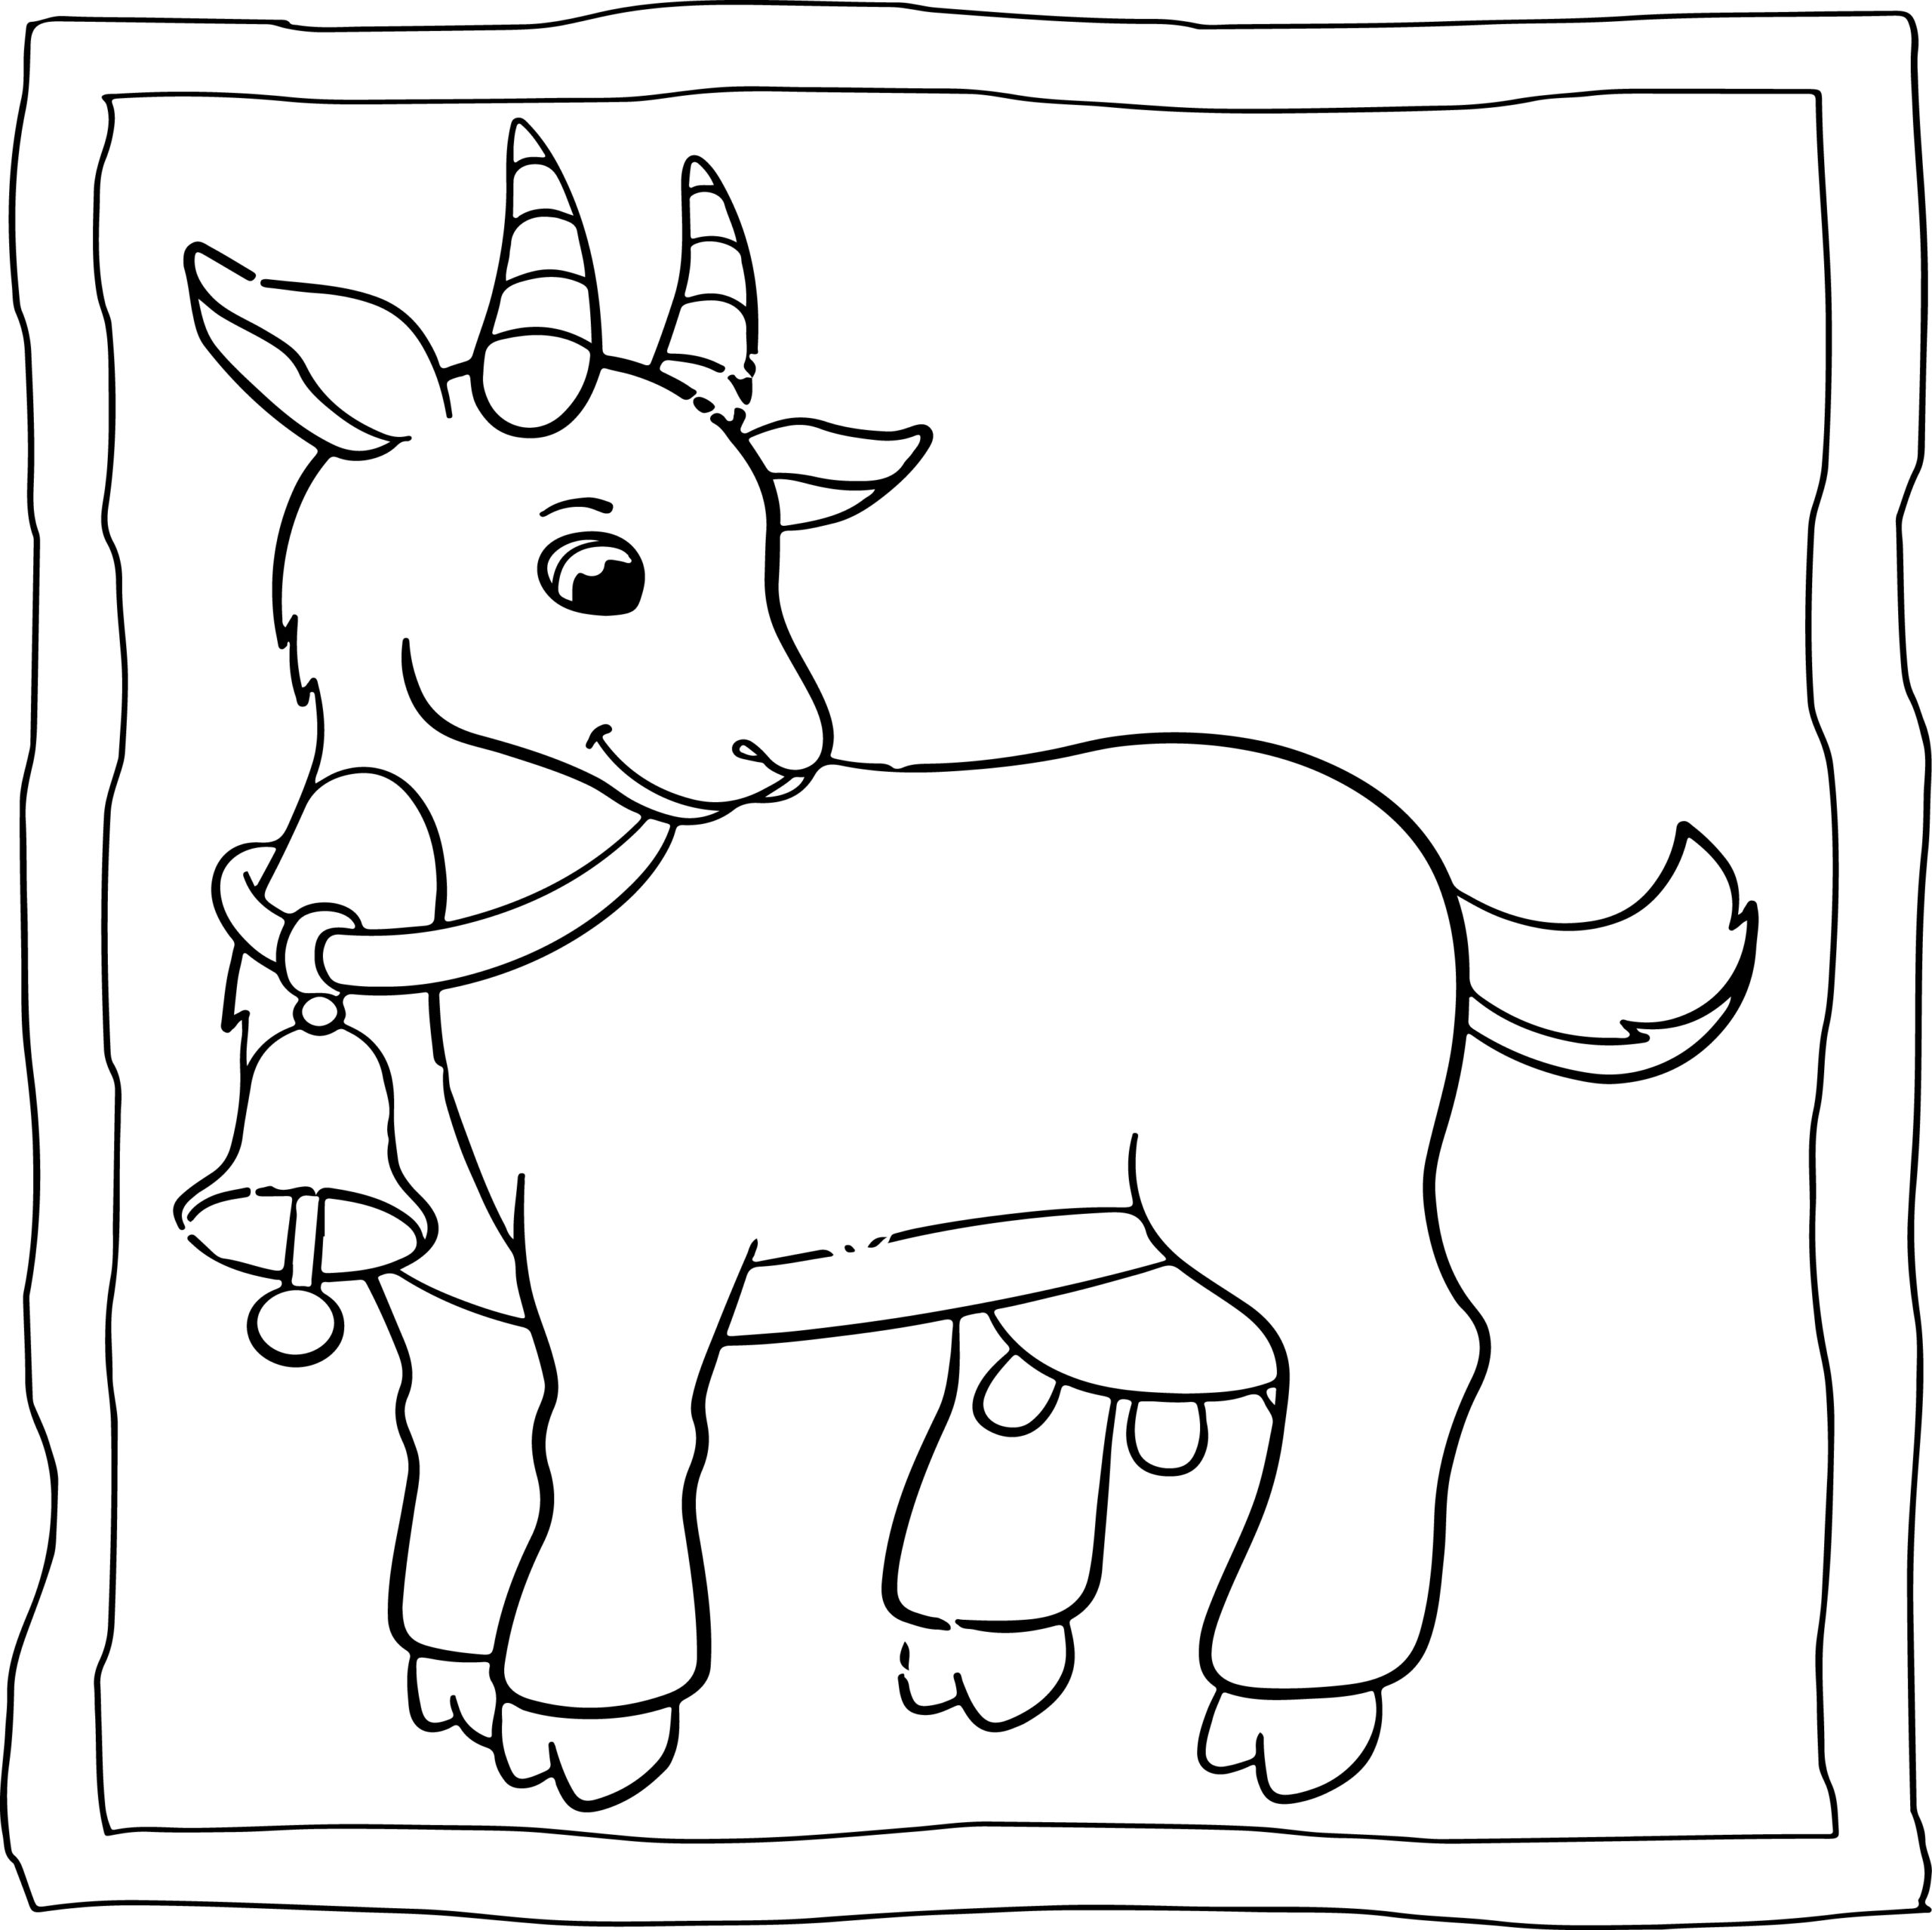 Goat coloring book easy and fun goat coloring pages for kids made by teachers